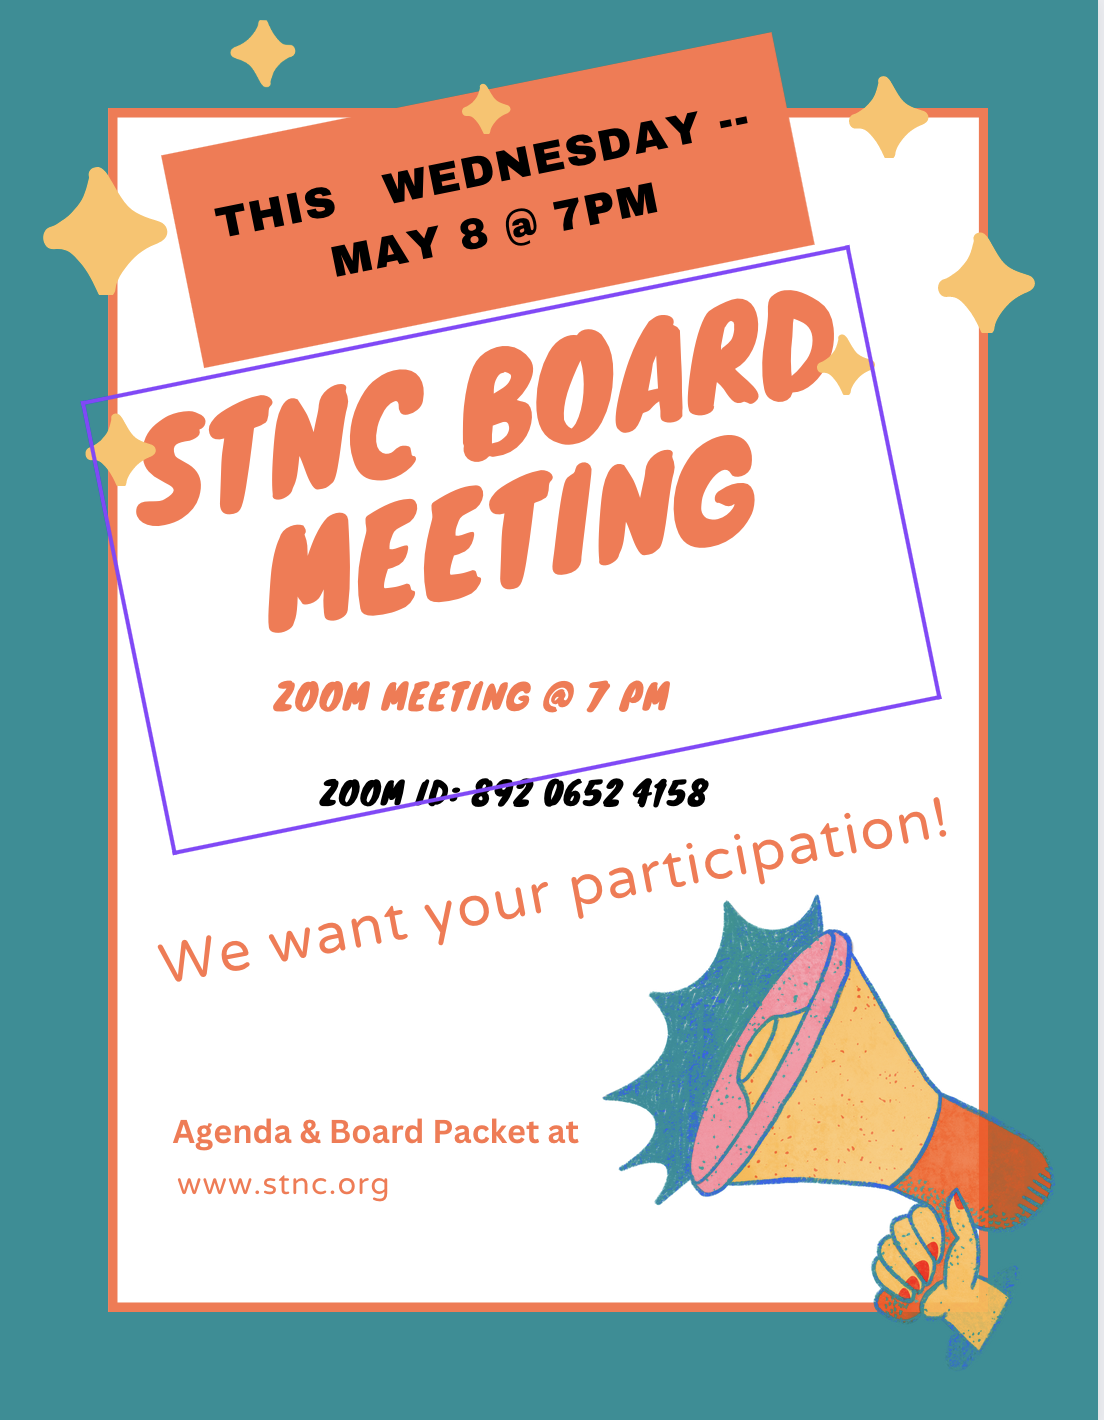 NOTICE: STNC Board Meeting Wed. May 8 @ 7PM